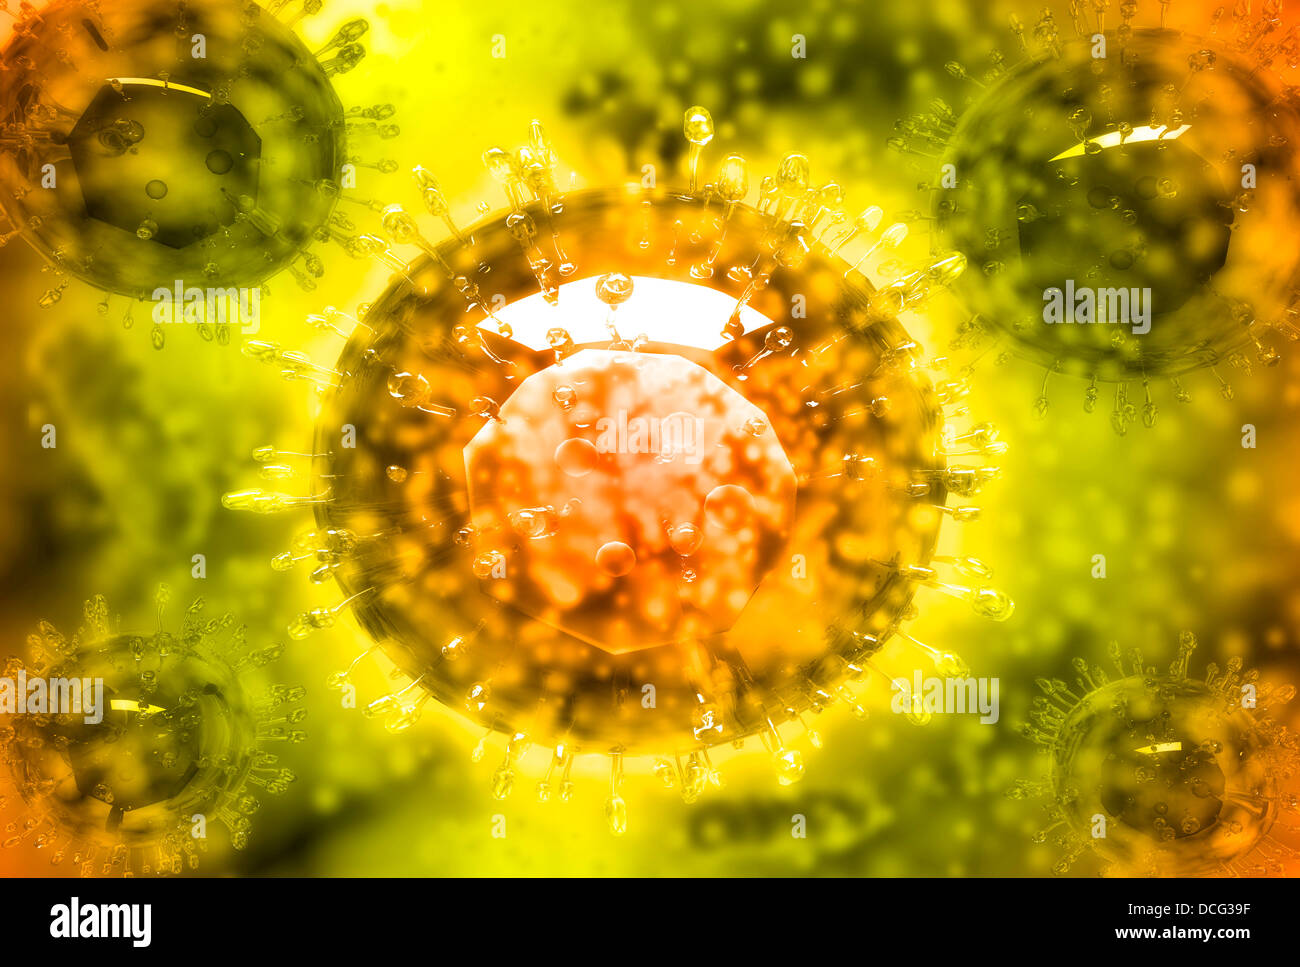 Group of H5N1 virus with glassy view. Stock Photo